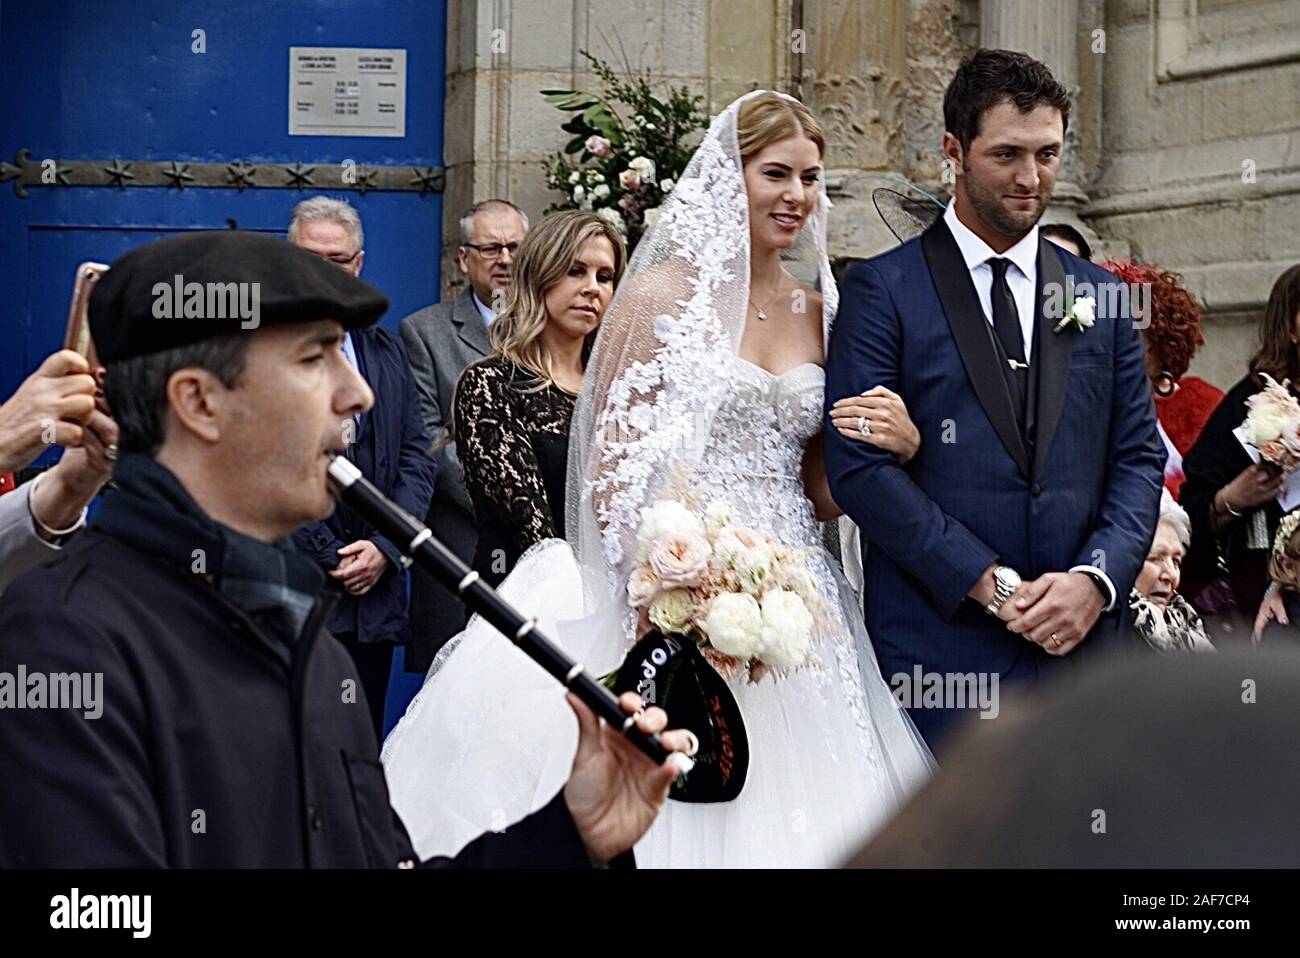 Bilbao, Spain. 13th Dec, 2019. Wedding of golfer Jon Rahm and Kelley Cahill at the Basilica of Our Lady of Begoña in Bilbao, Friday December 13, 2019 Credit: CORDON PRESS/Alamy Live News Stock Photo